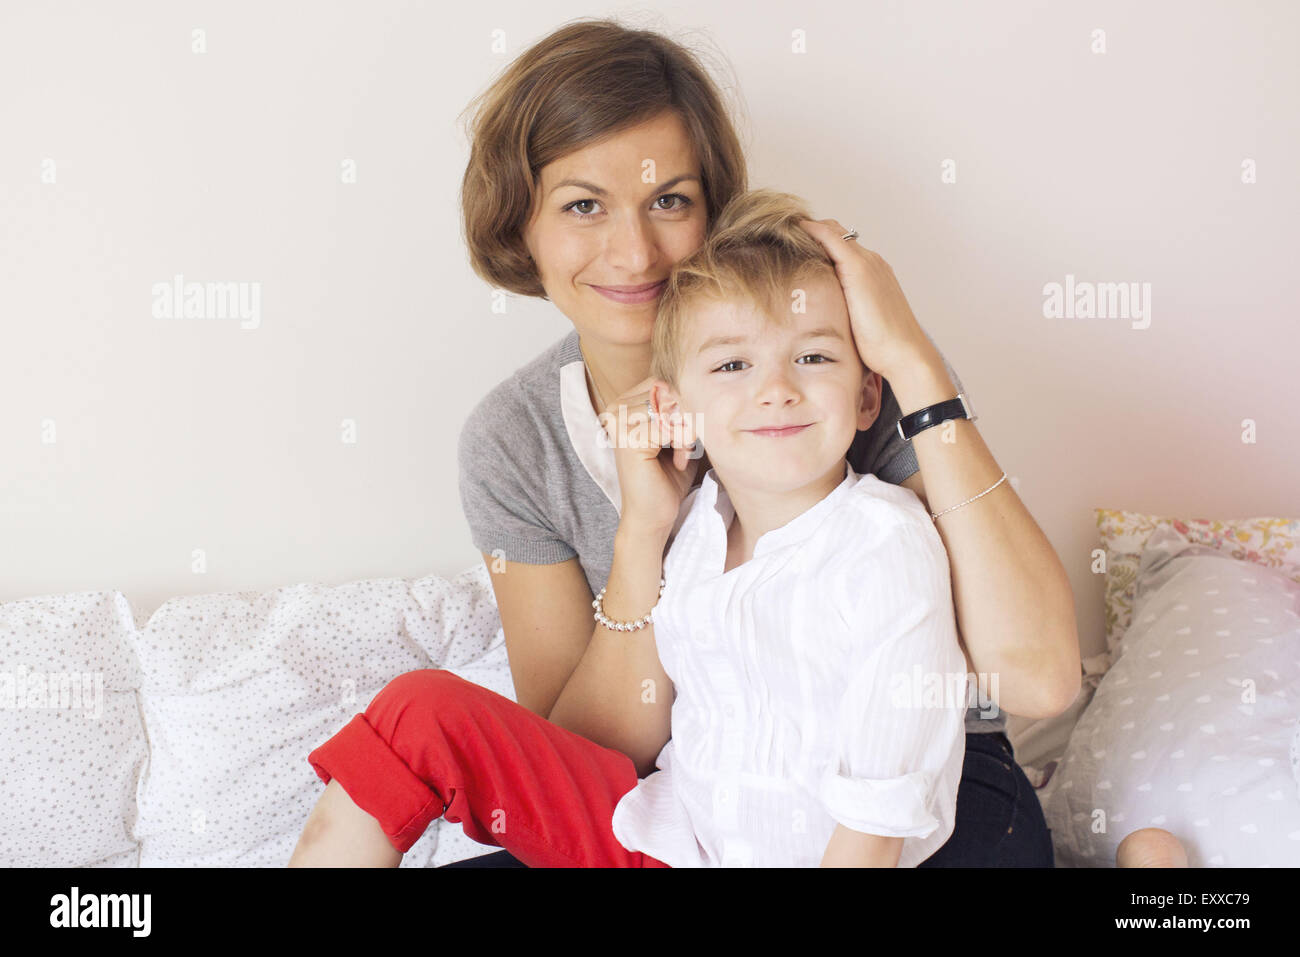 Mother and son, portrait Stock Photo